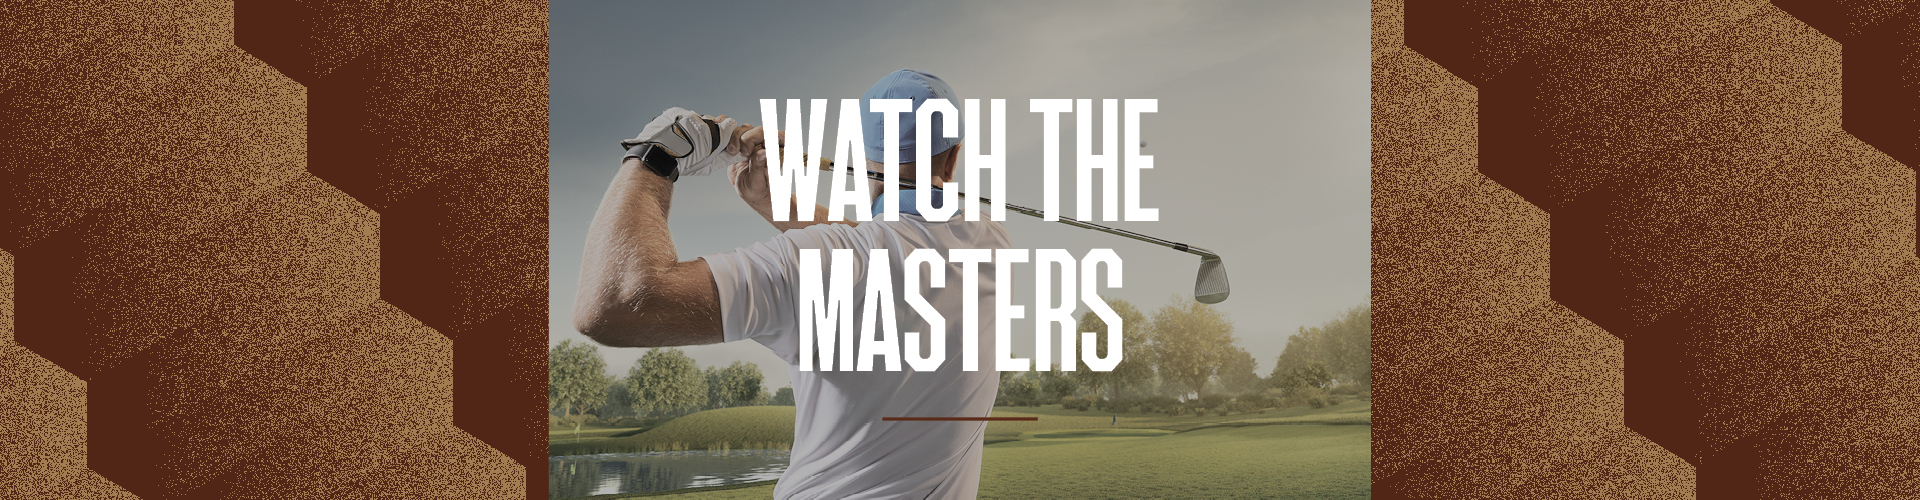 Watch the Masters in Soho